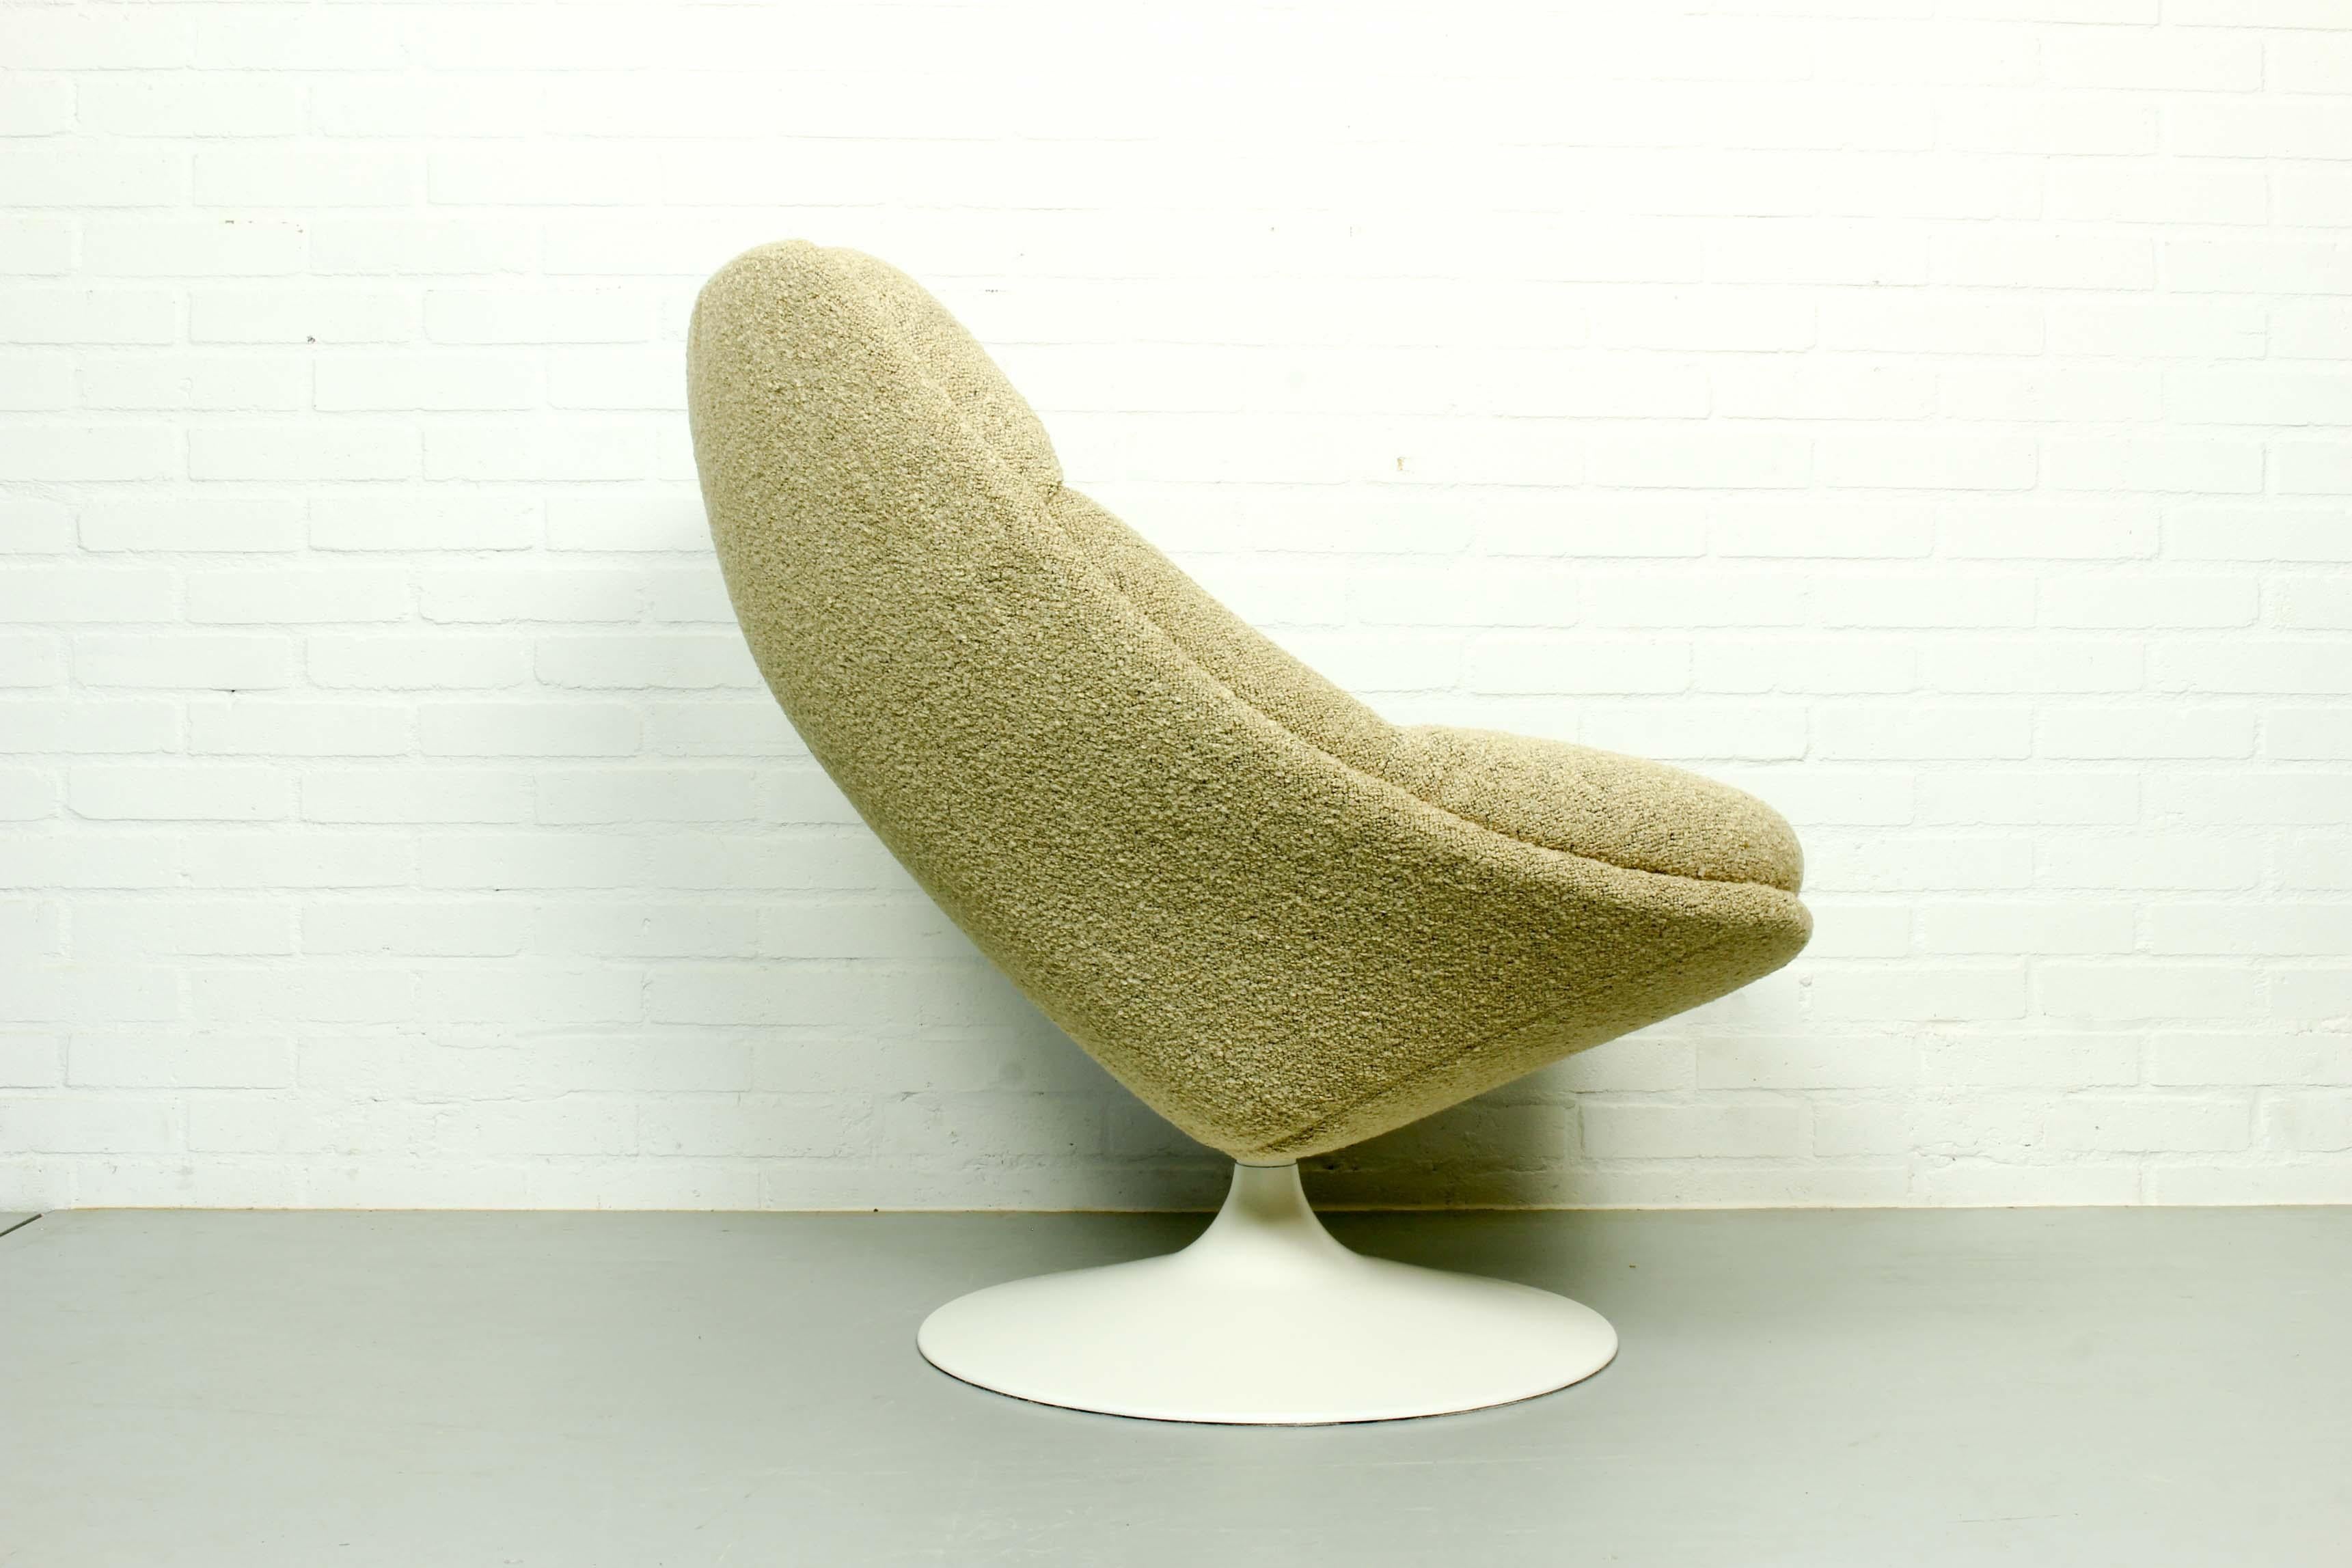 An original F557 swivel lounge chair by Pierre Paulin for Artifort, 1960s. This chair is reupholstered in neutral colored bouclé fabric (Designtex Lambert color: Latte bouclé). Precursor of the globe chair, this chair is no longer manufactured and